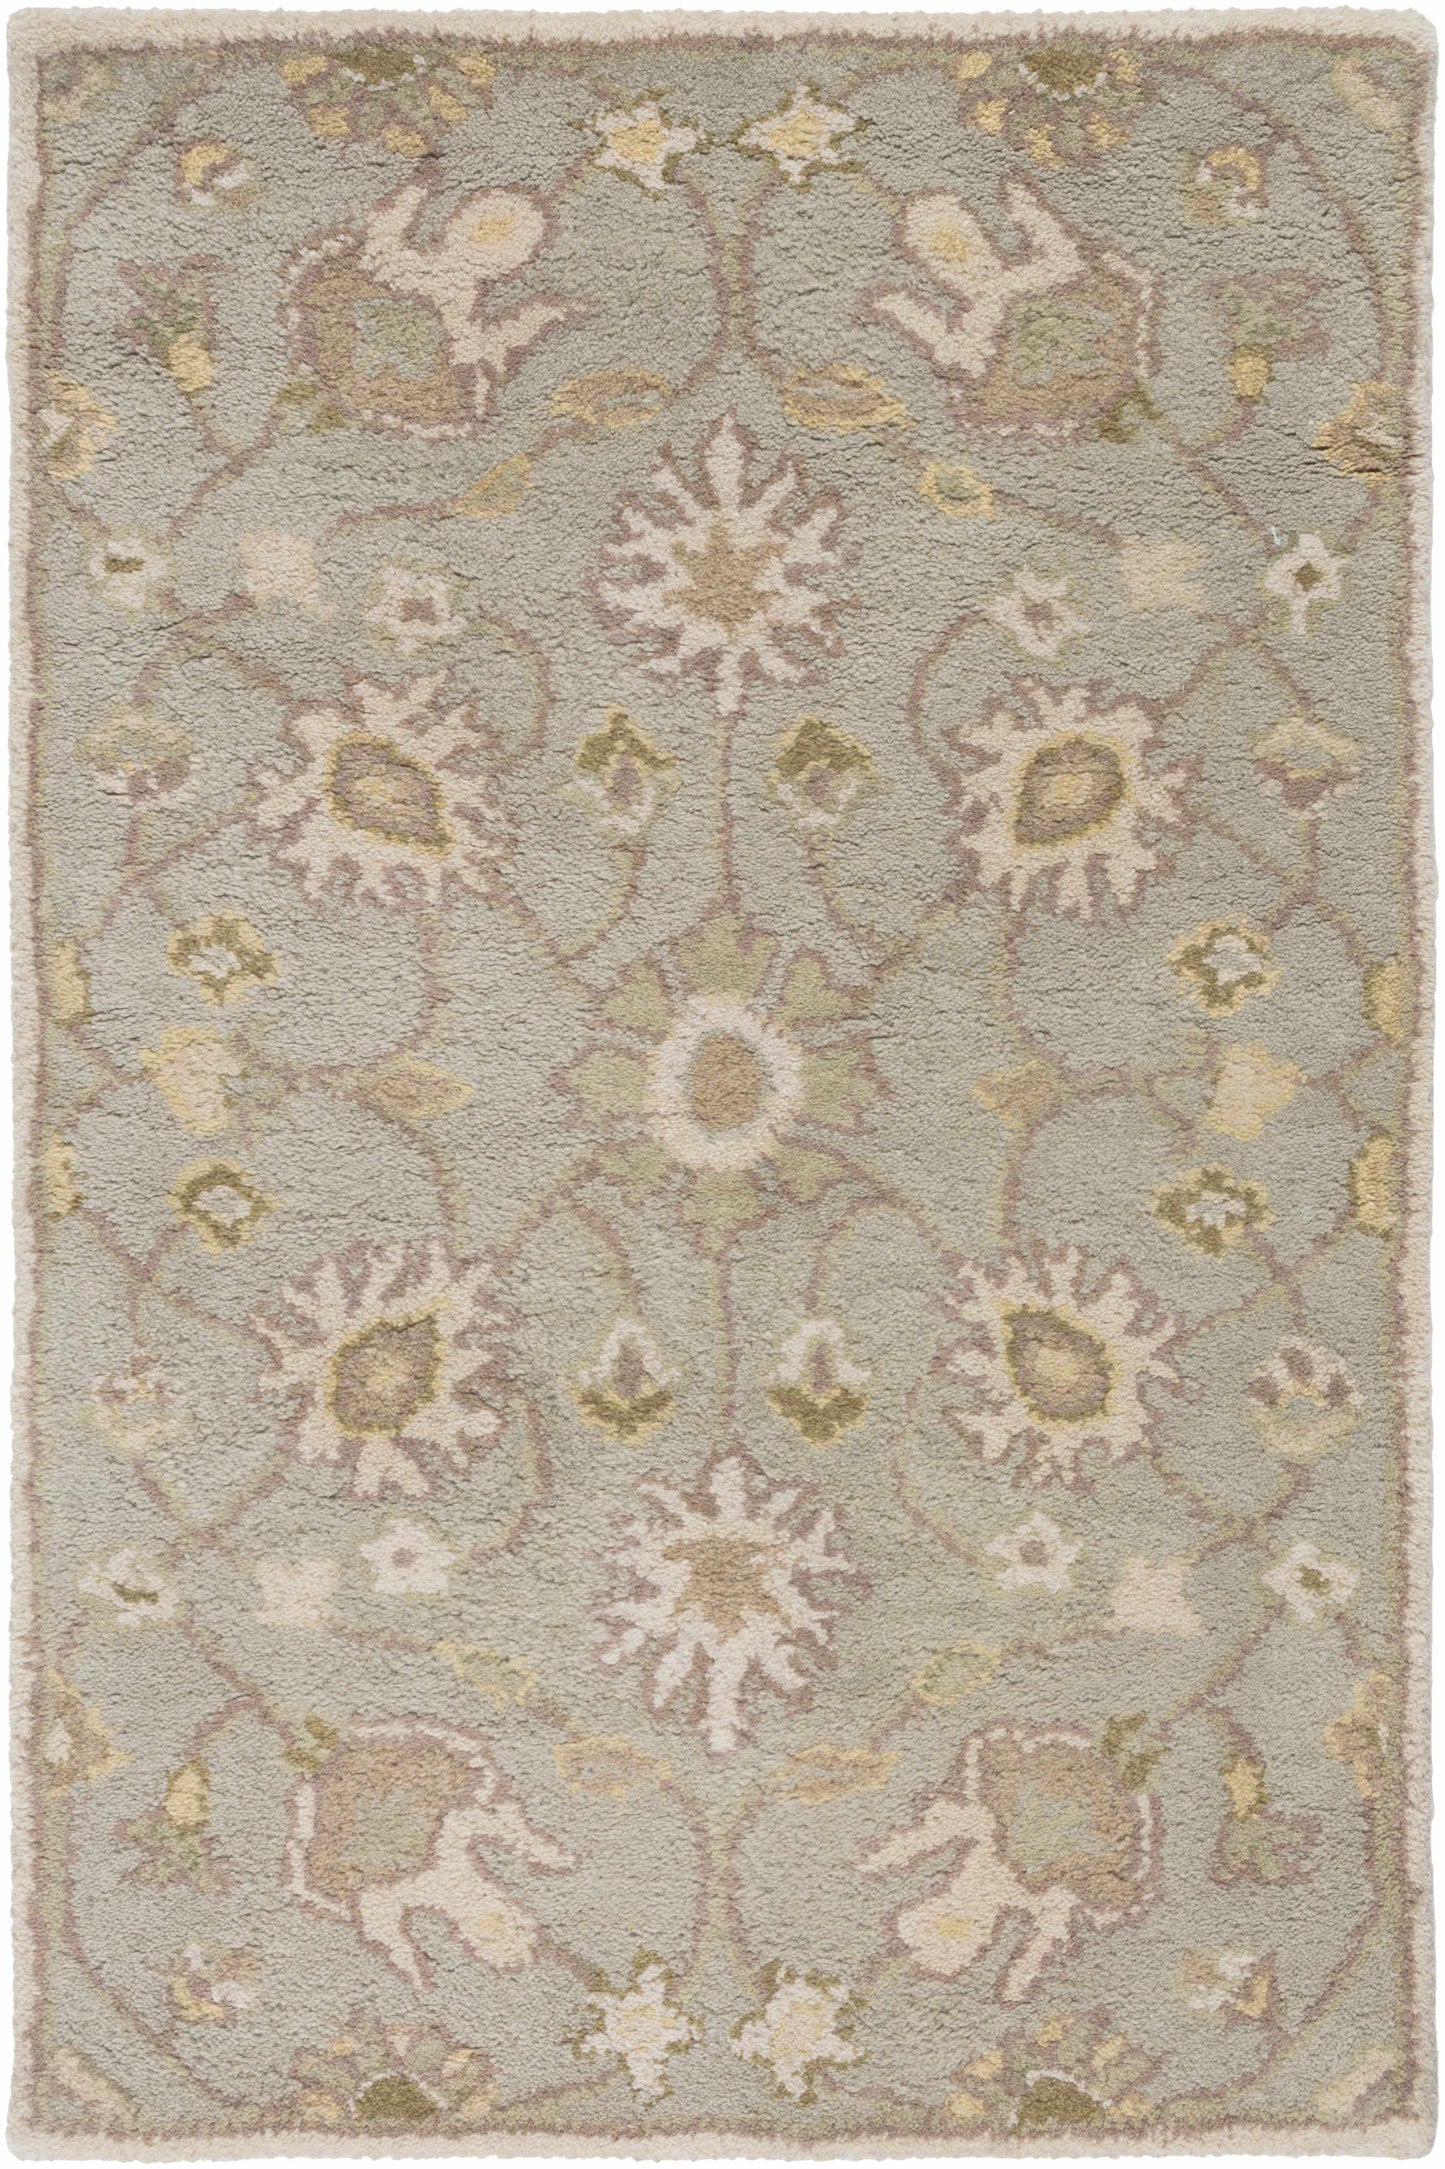 Boutique Rugs Rugs 2' x 3' Rectangle Logville Hand Tufted Light Olive 1121 Area Rug